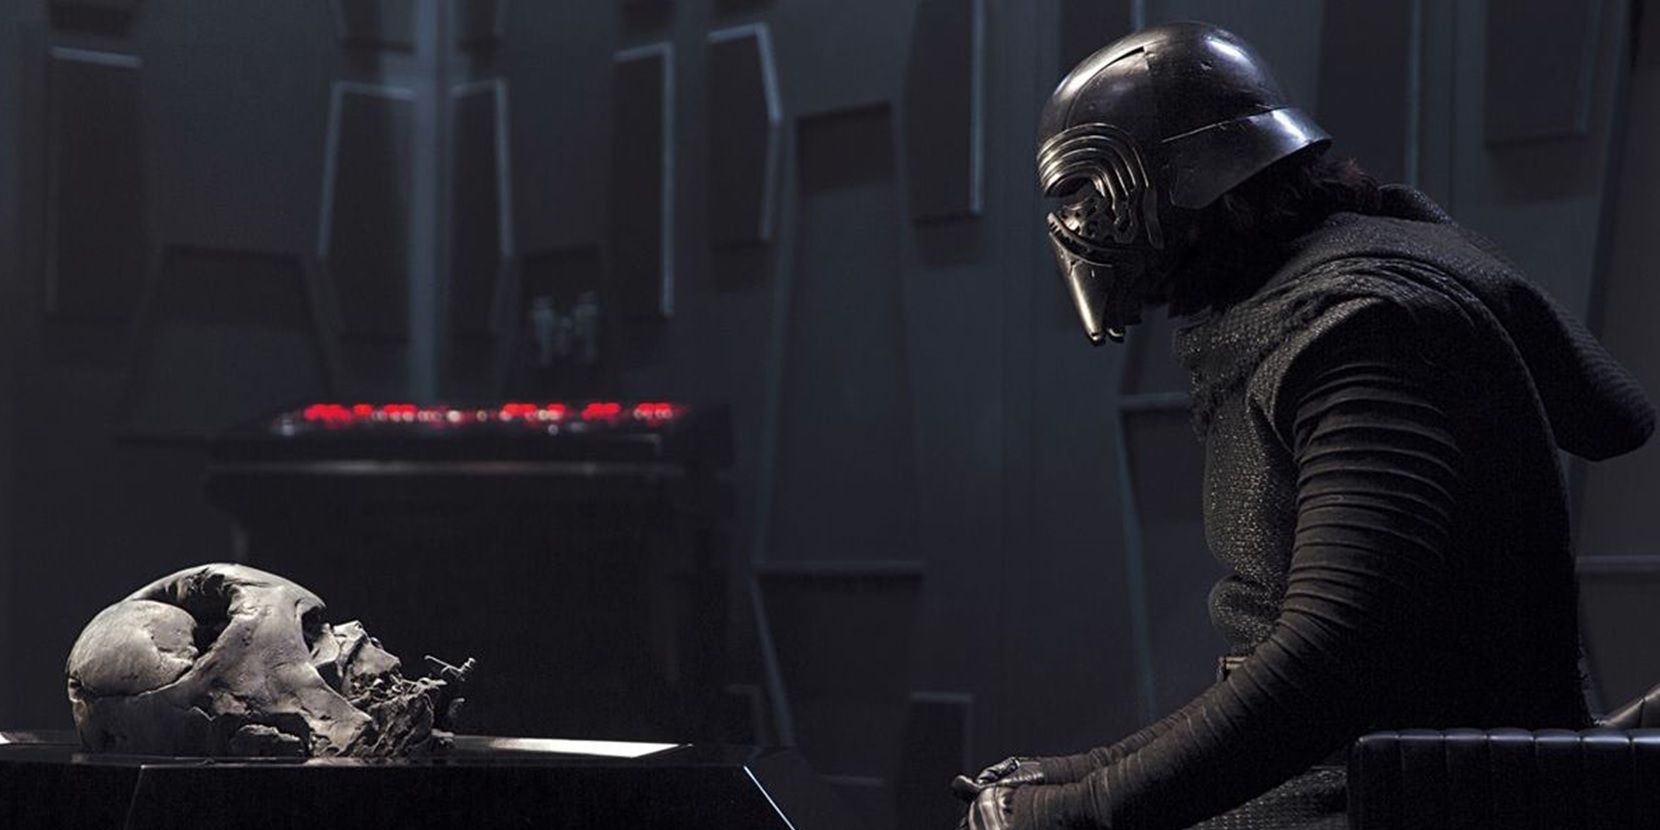 Kylo Ren worships Vader's mask in The Force Awakens